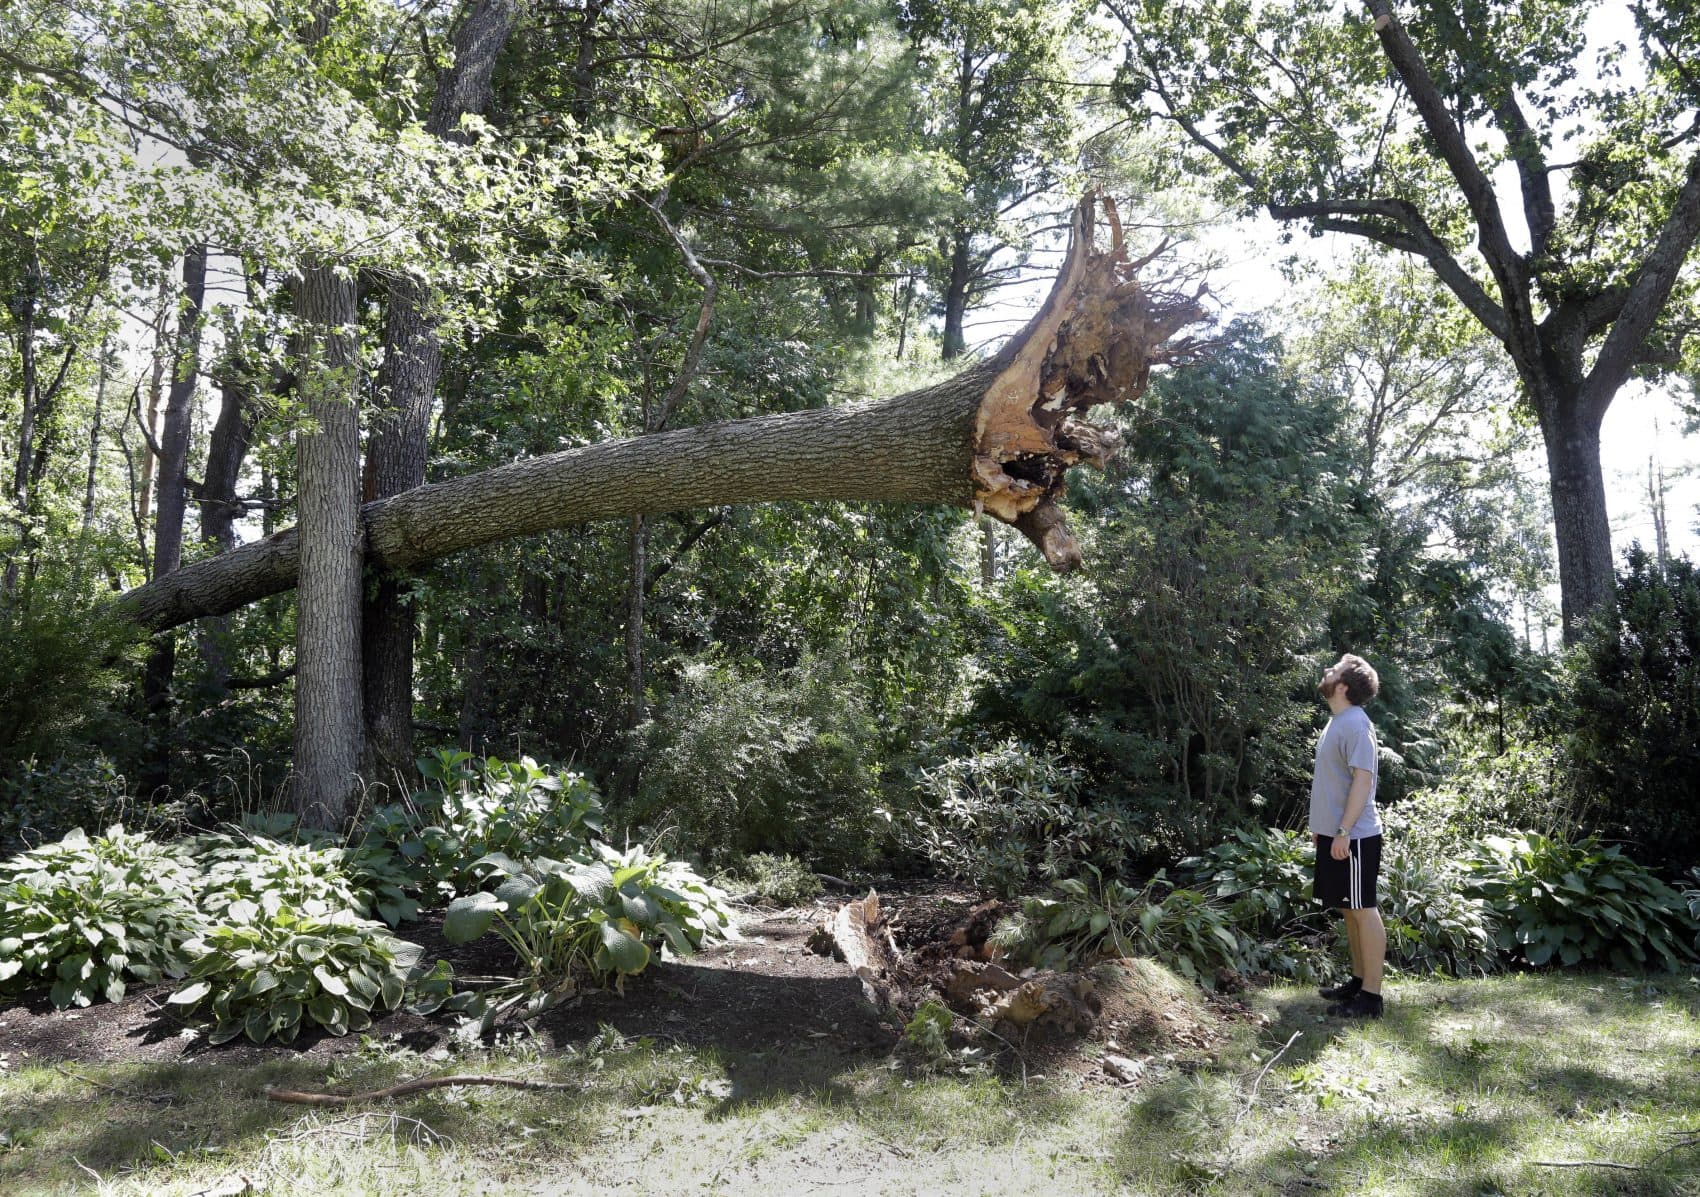 Ian Thompson looks at a tree uprooted in his Concord neighborhood after an EF-1 tornado touched down early Monday morning. (Elise Amendola/AP)